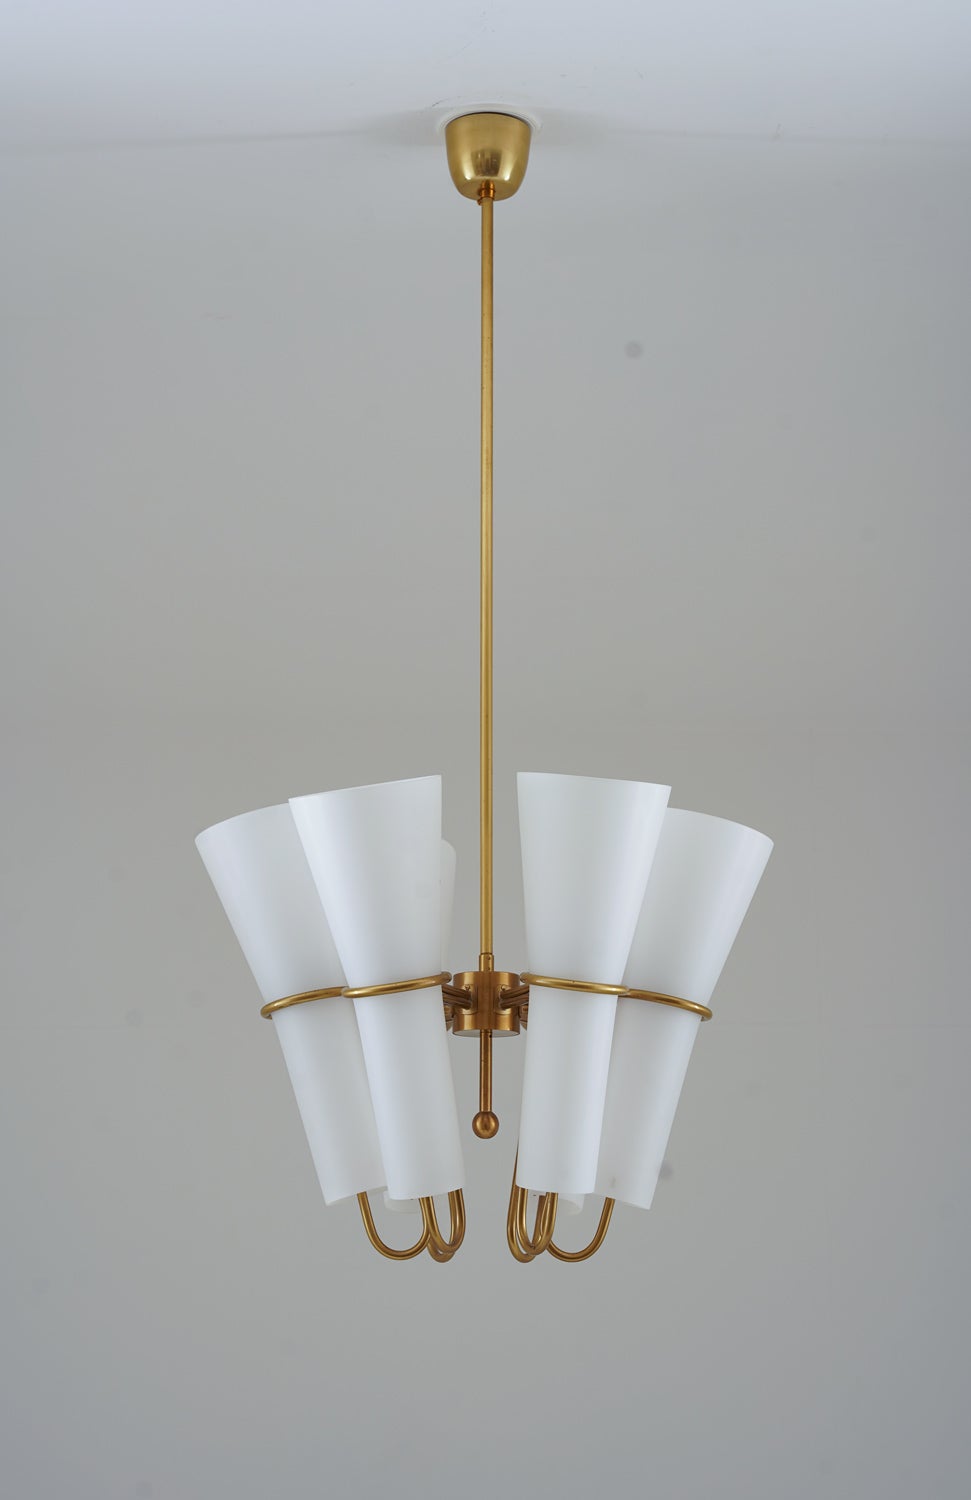 Very rare chandeliers by Hans-Agne Jakobsson, manufactured by Arnold Wiig Fabrikker, Norway.
These magestic lamps feature six light sources, hidden by large opaline glass shades. The shades are held by a brass frame.

The shades’ height is 40cm